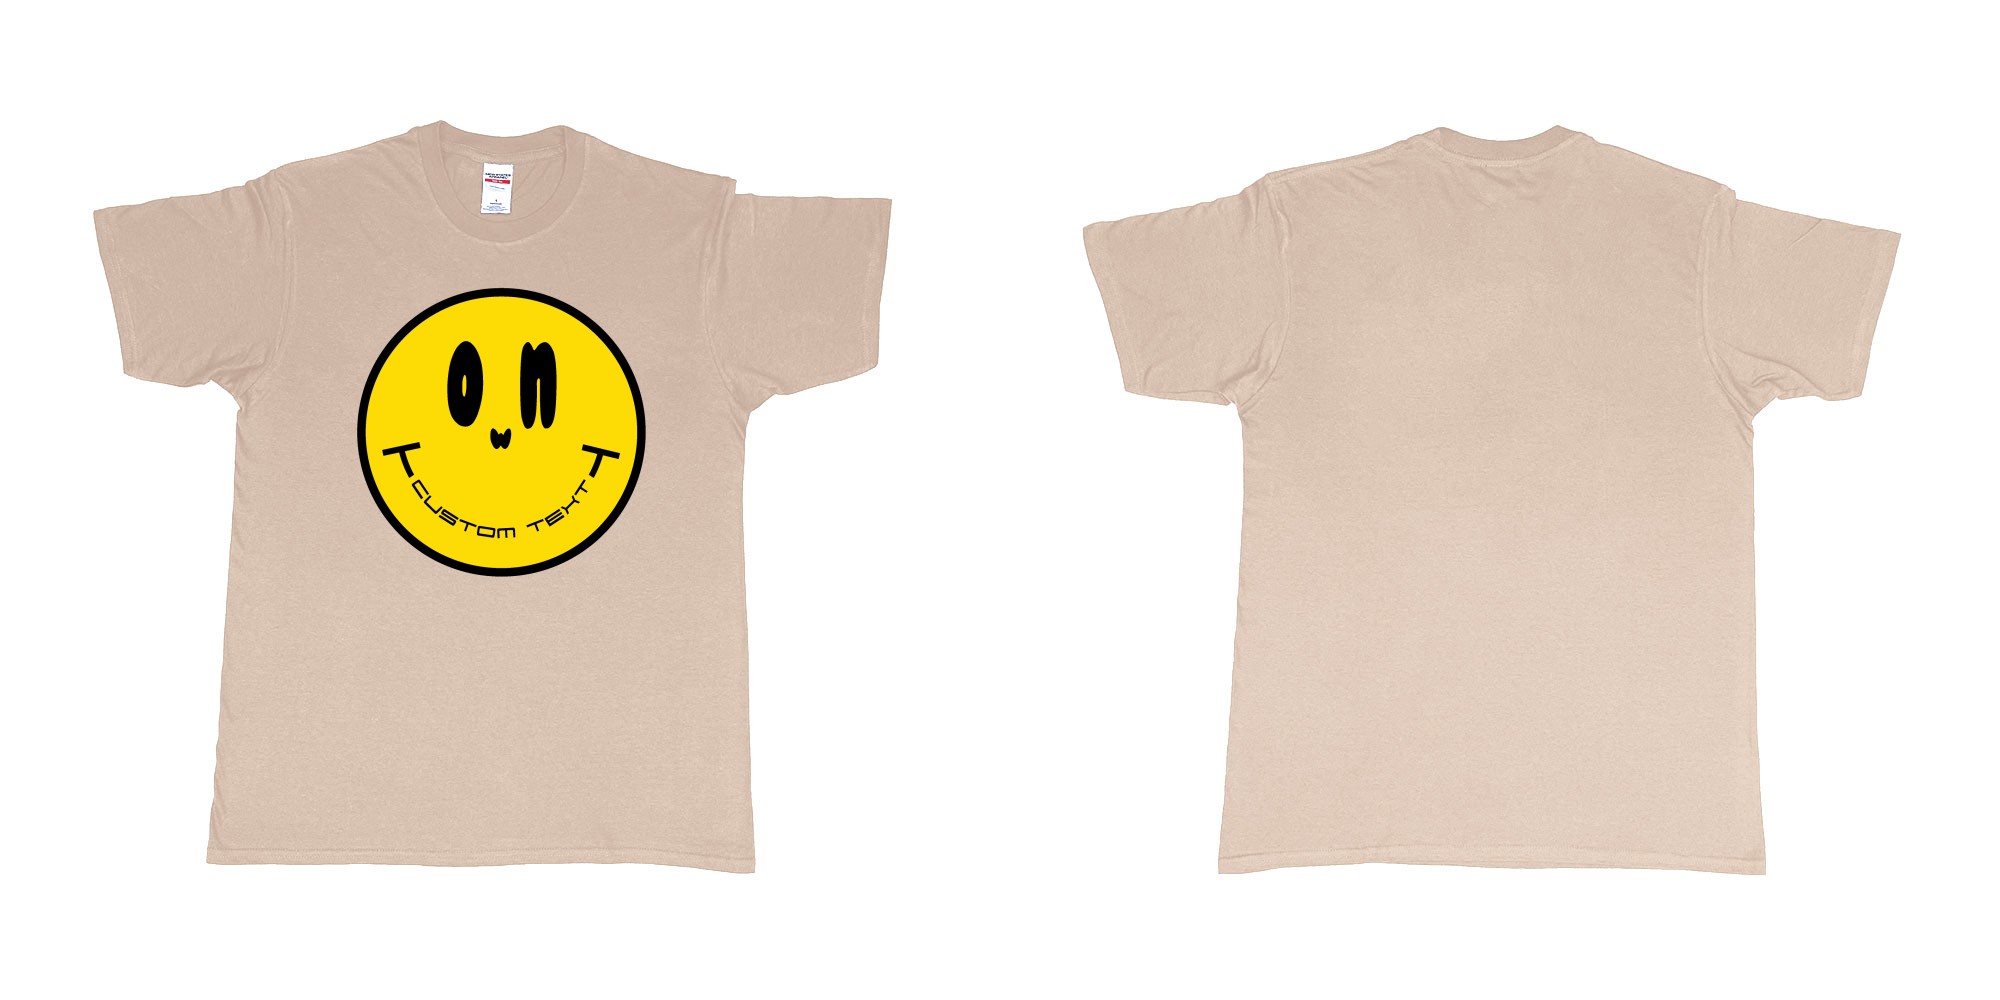 Custom tshirt design smiley face emoji custom text in fabric color sand choice your own text made in Bali by The Pirate Way